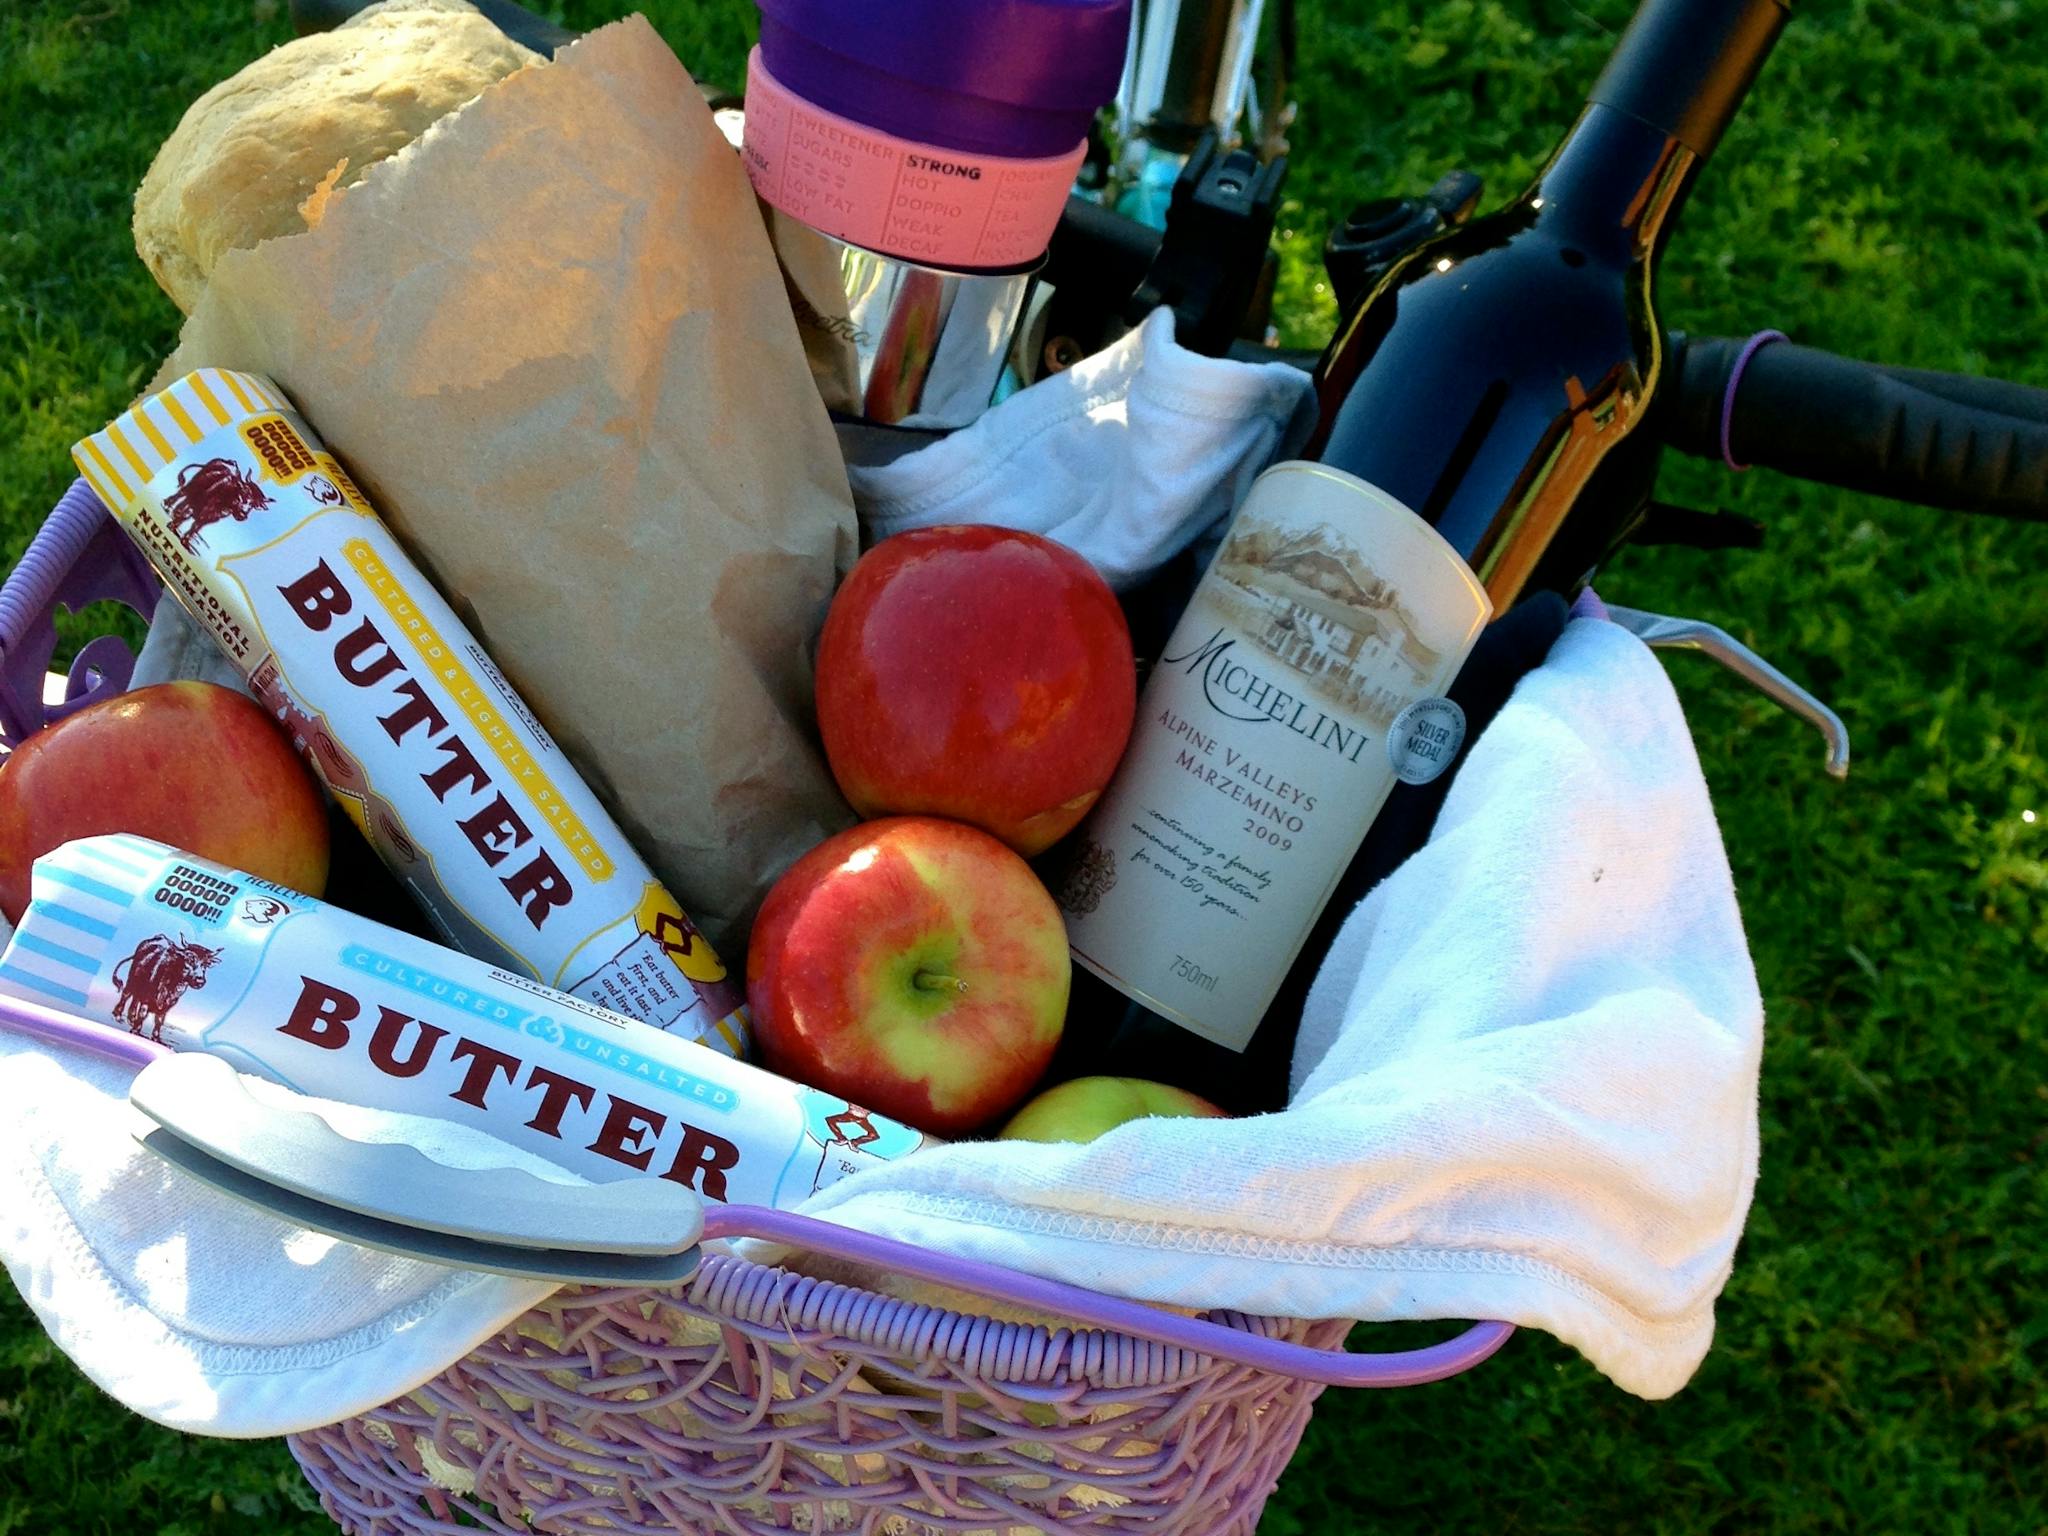 Fill your bicycle basket on one of our gourmet cycle tours